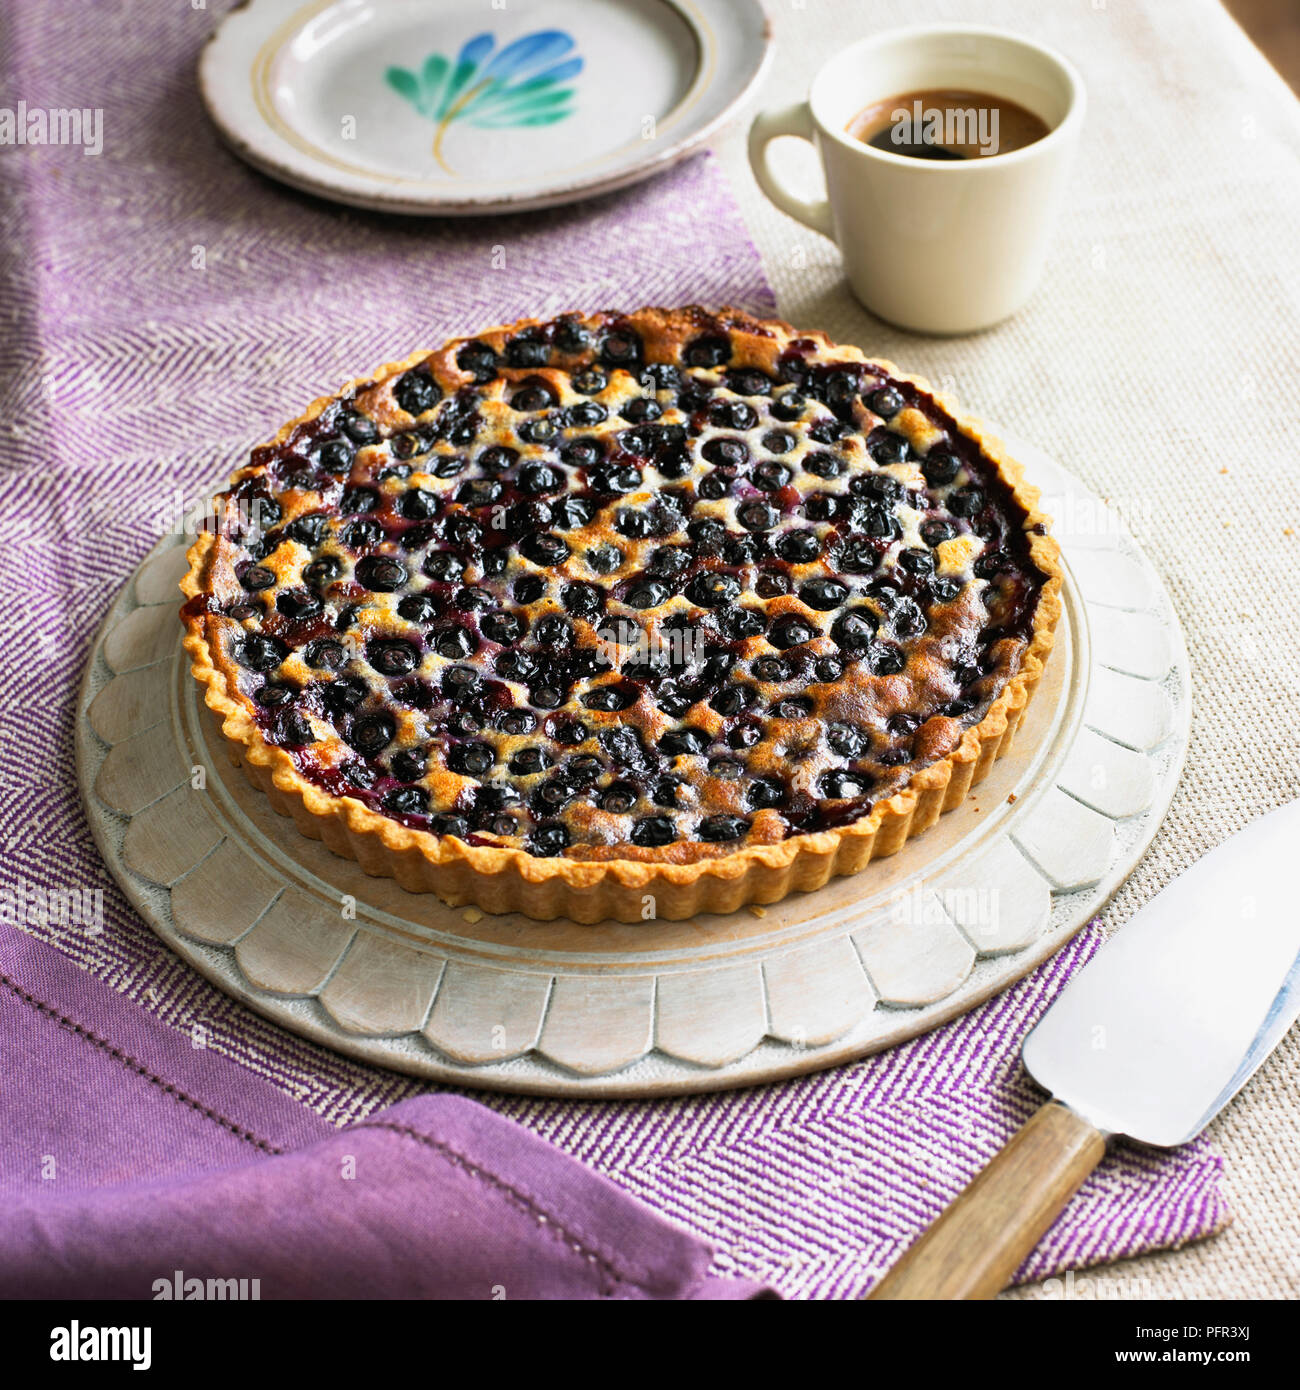 Blueberry cream cheese tart, cake server, coffee cup and plate nearby Stock Photo